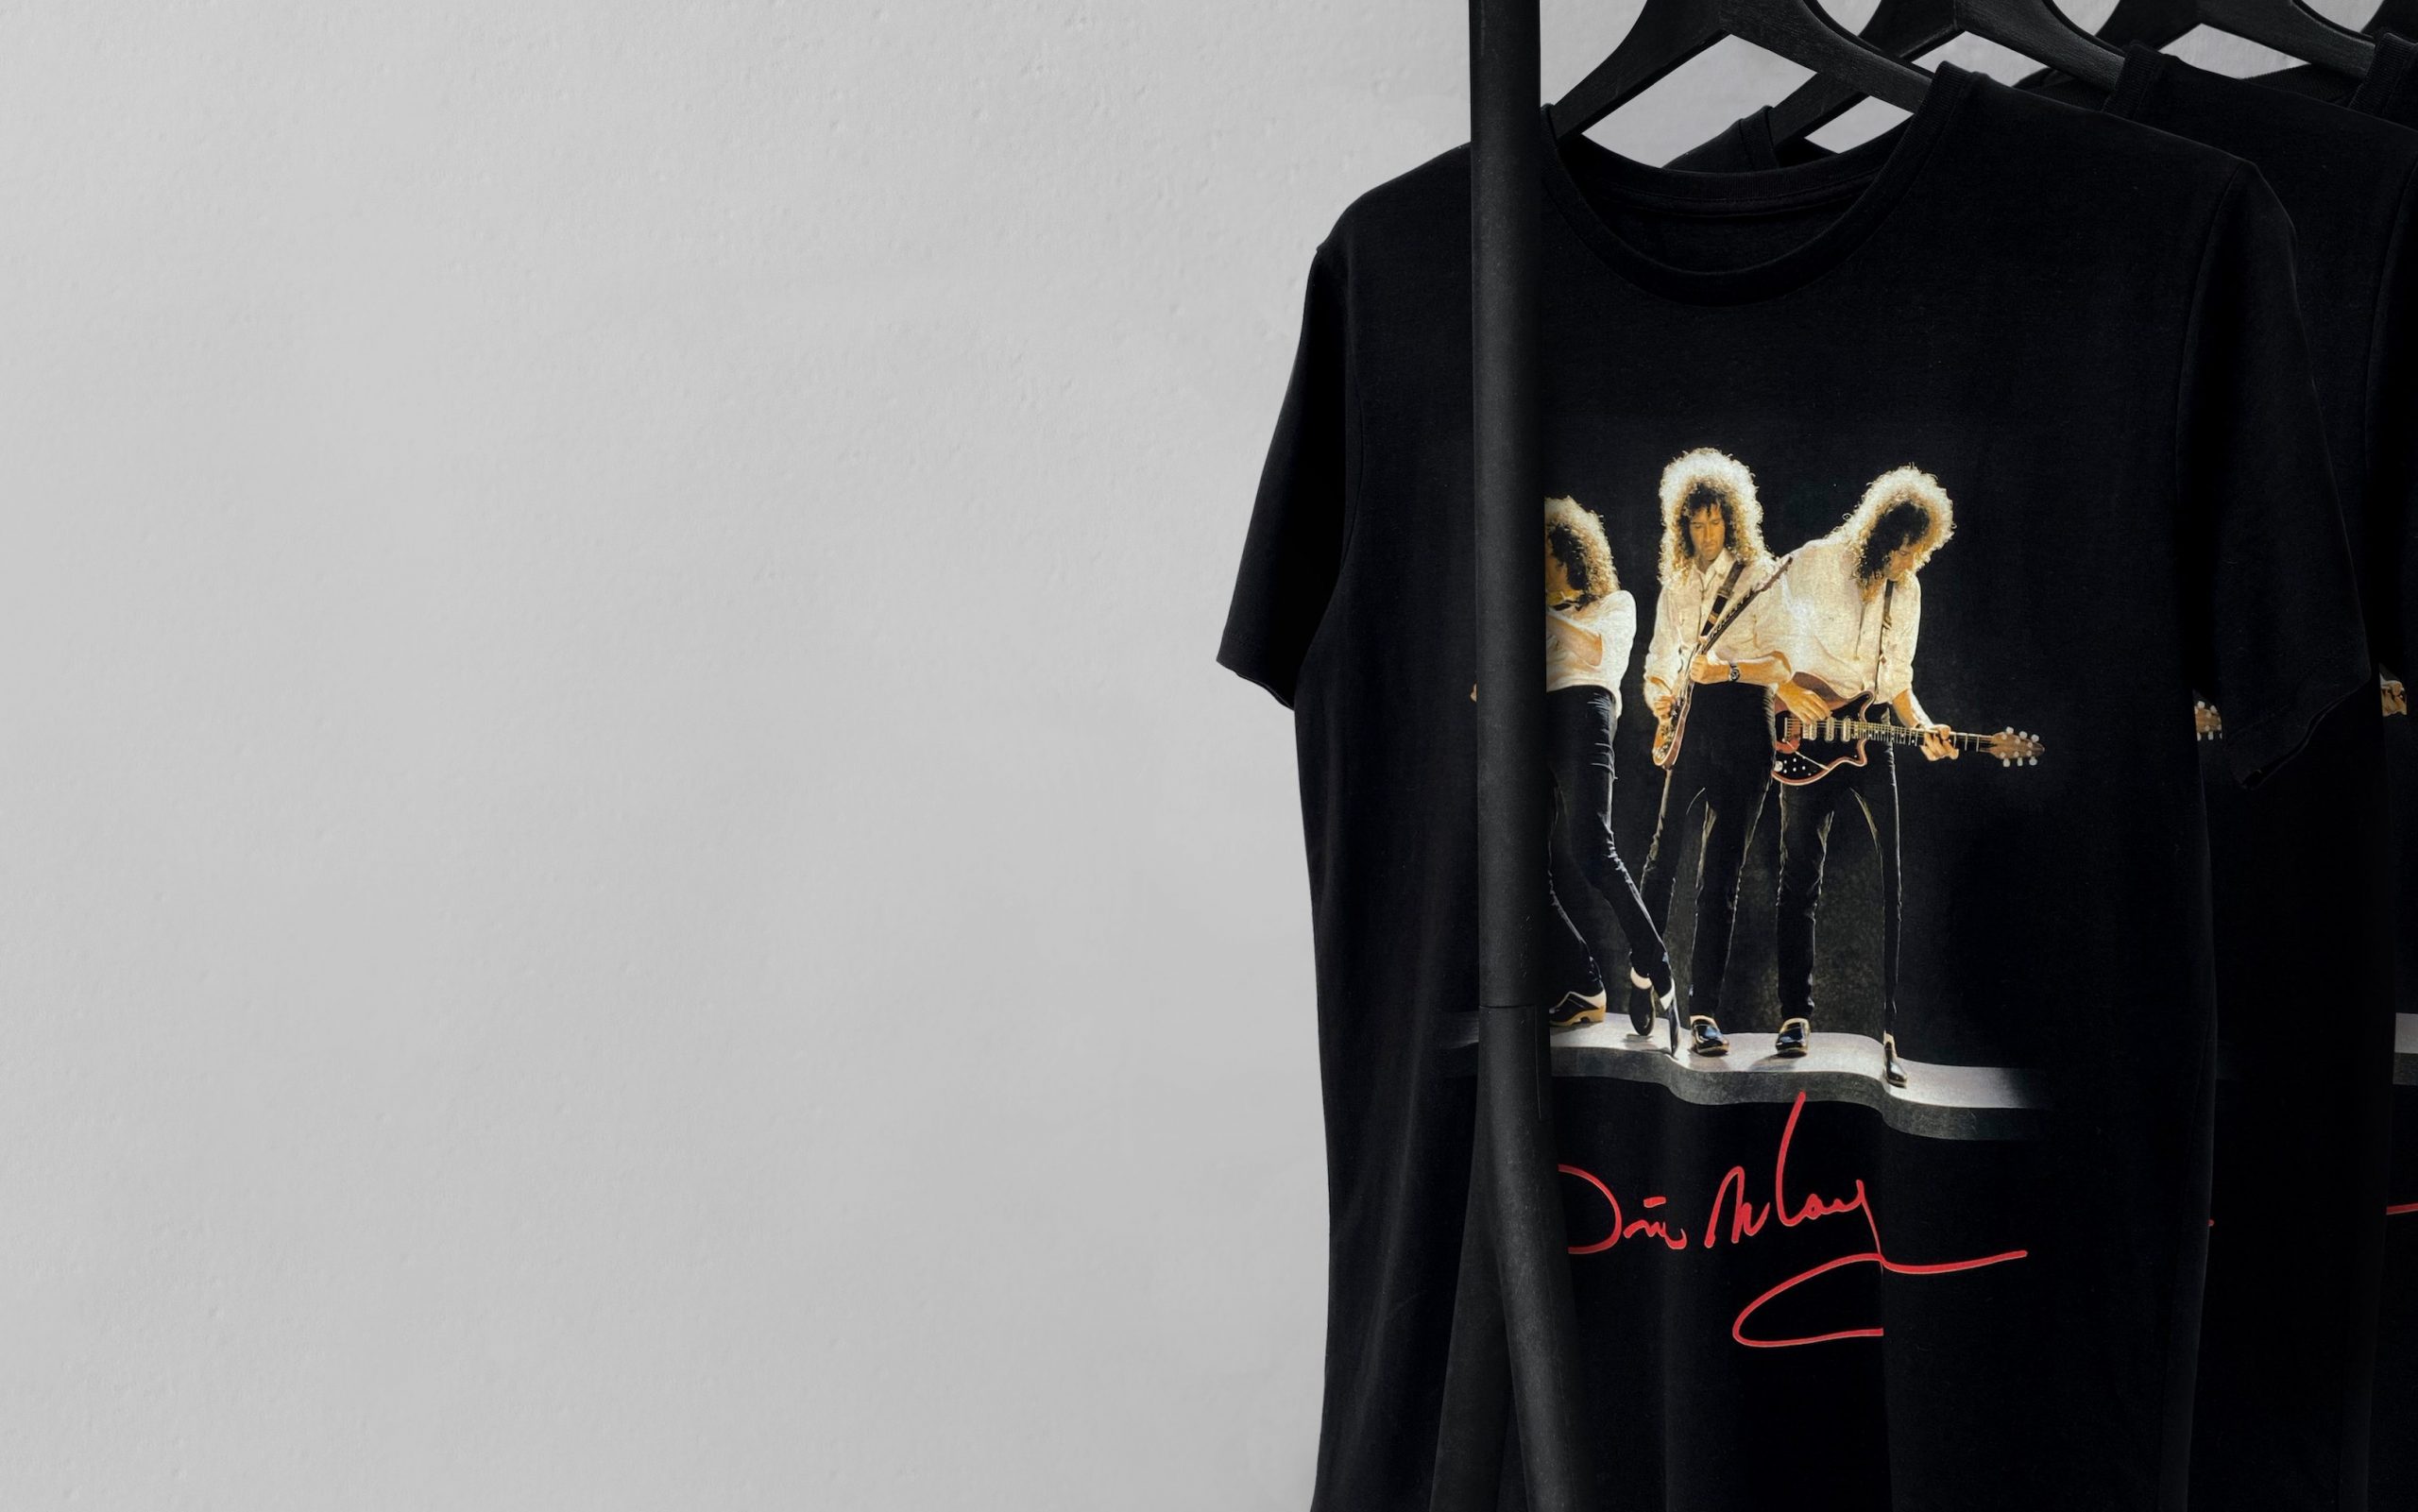 Brian May DTG printed t-shirt by Paul Bristow's